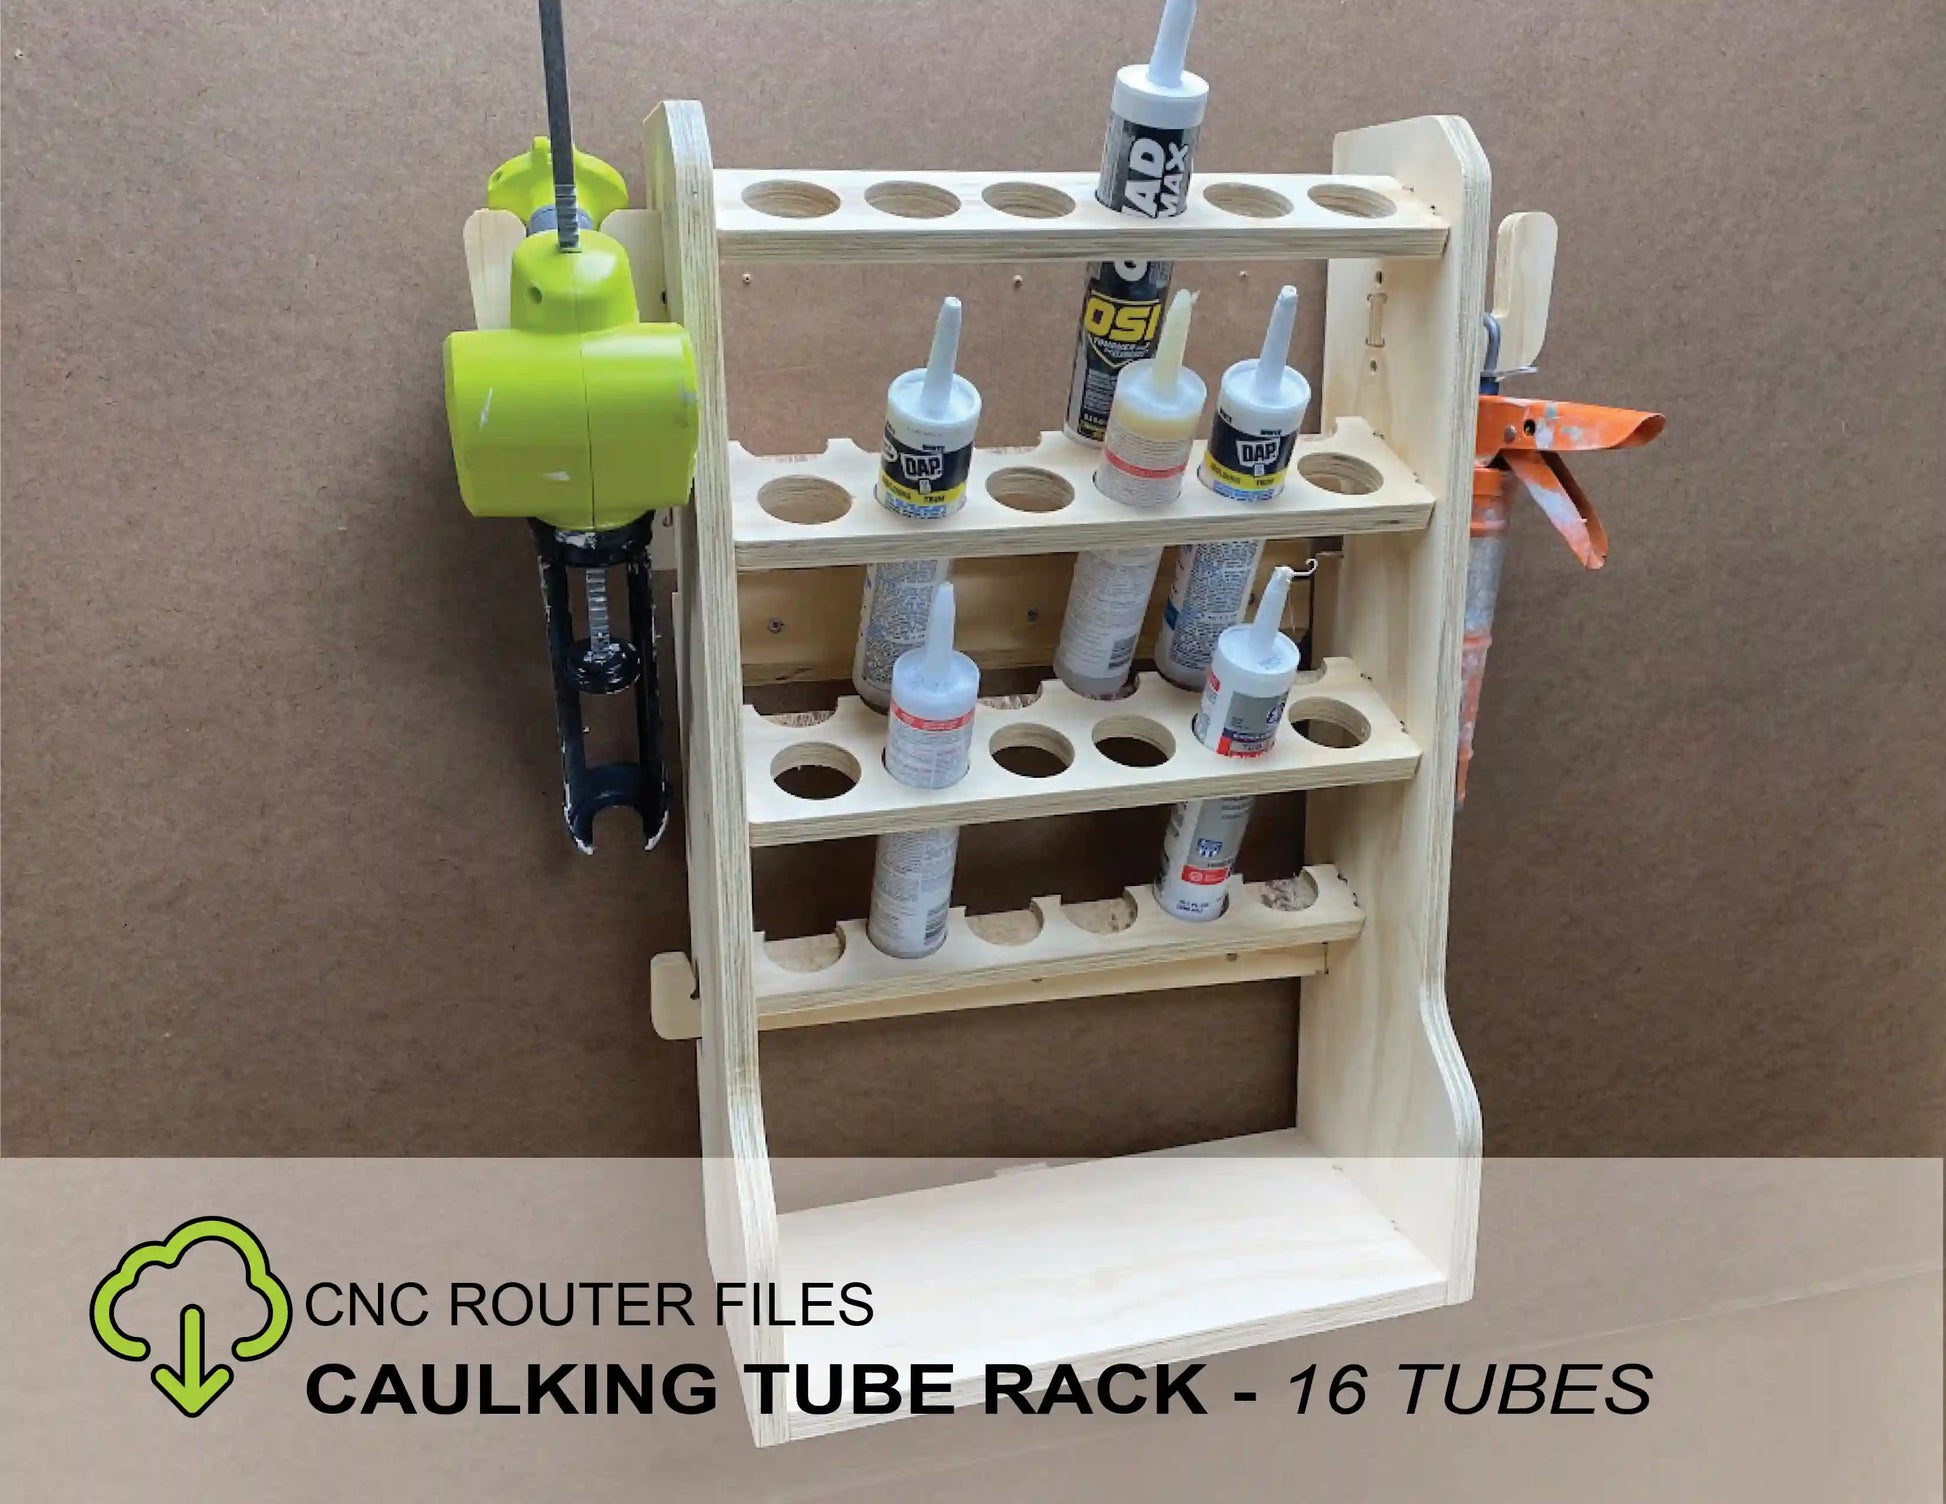 3d models of a caulk tube organizer shelf with fusion 360 vectric vcarve pro crv dxf svg files for making a cnc router project that stores tubes of caulking in your garage